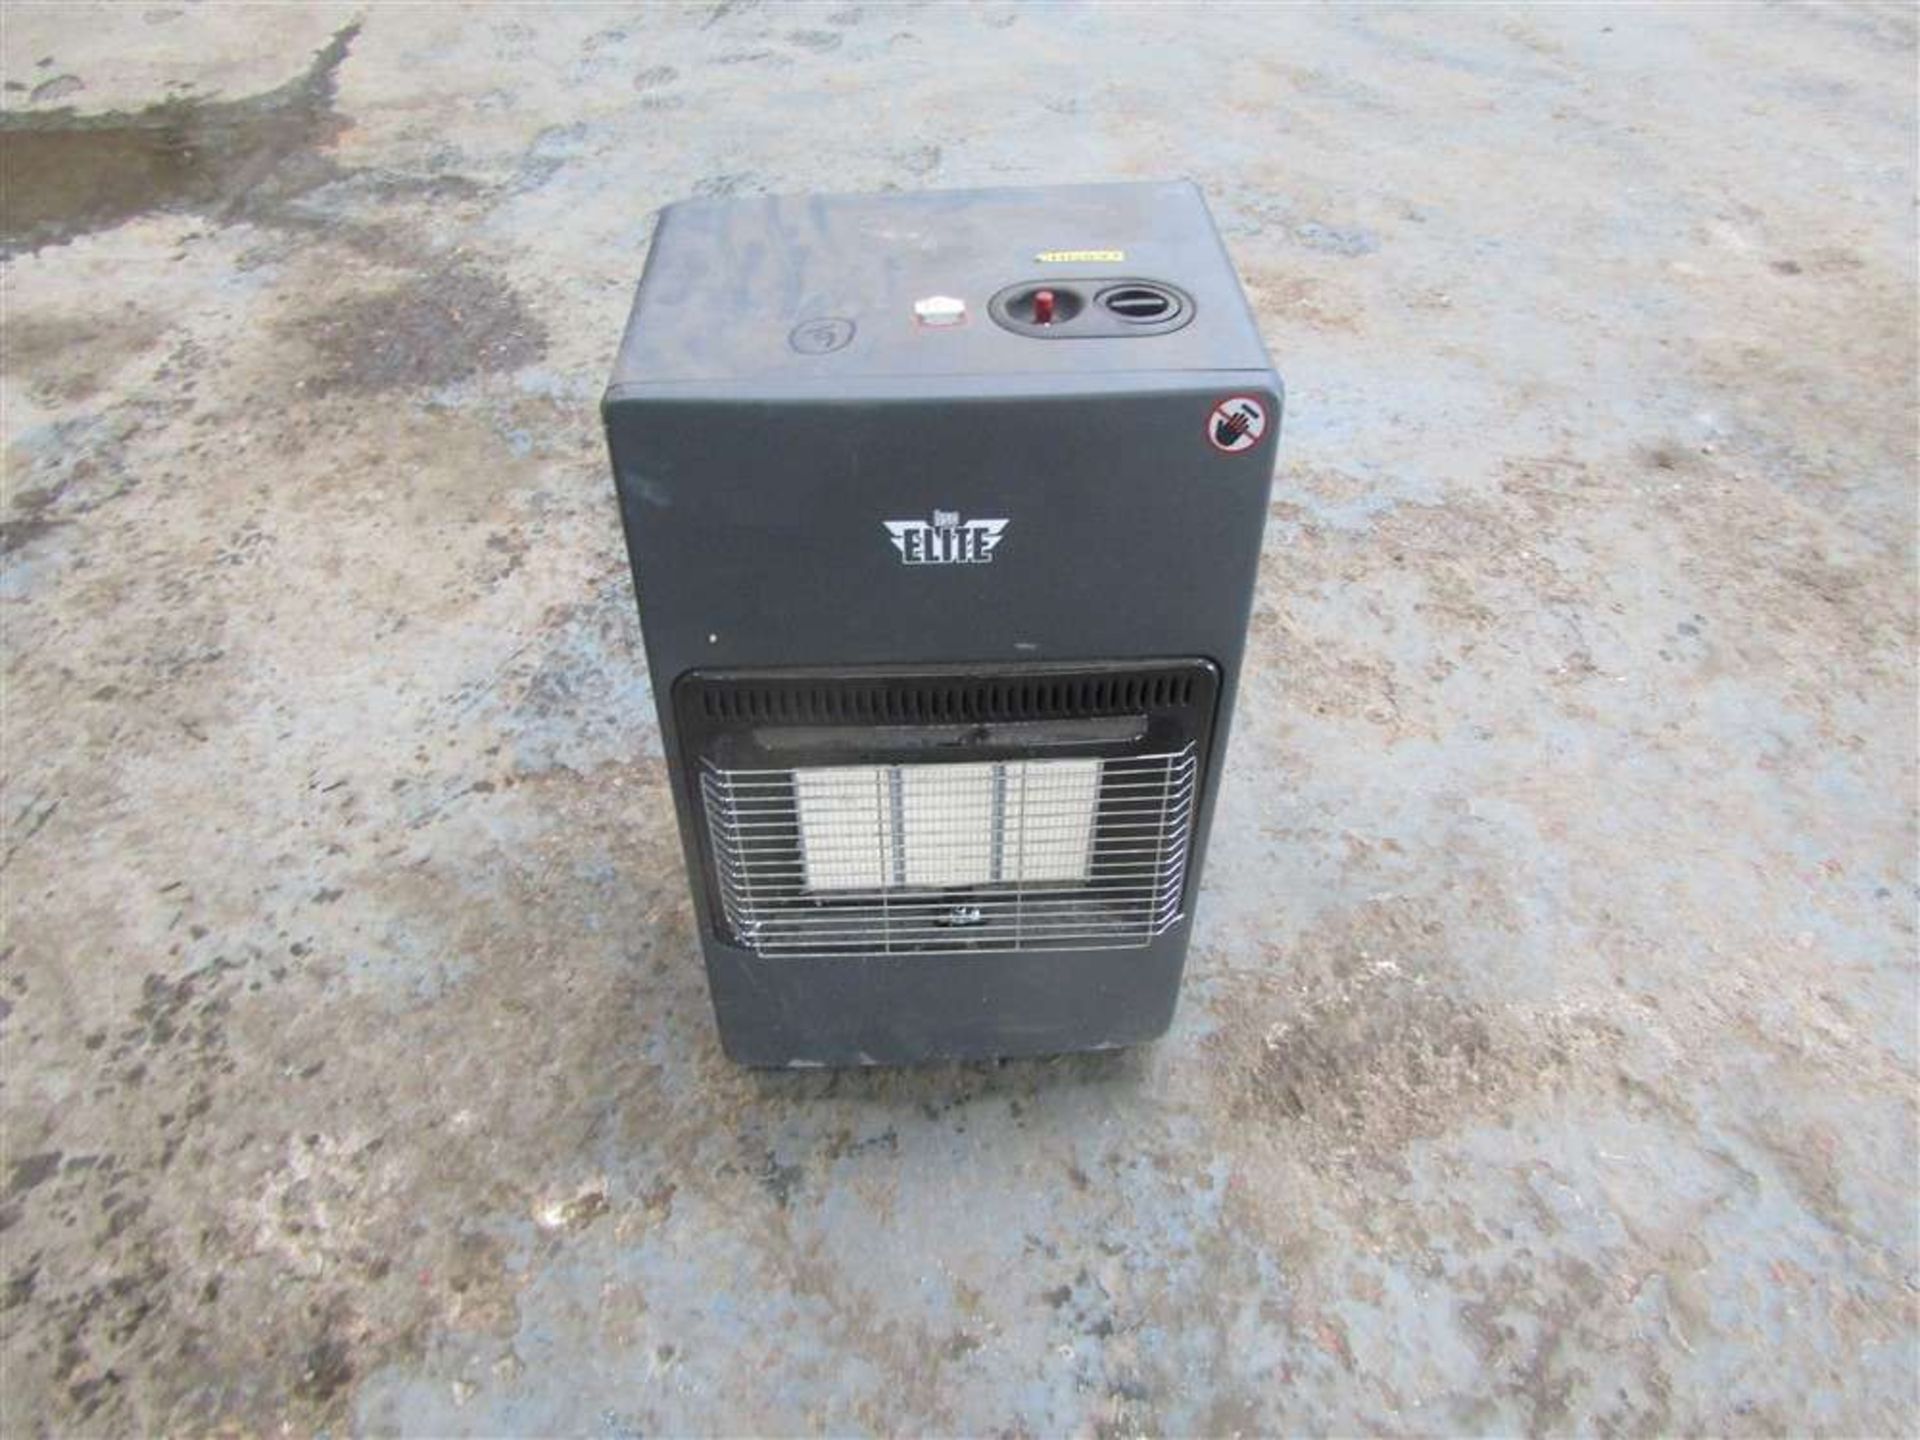 Cabinet Heater (Direct Hire Co)